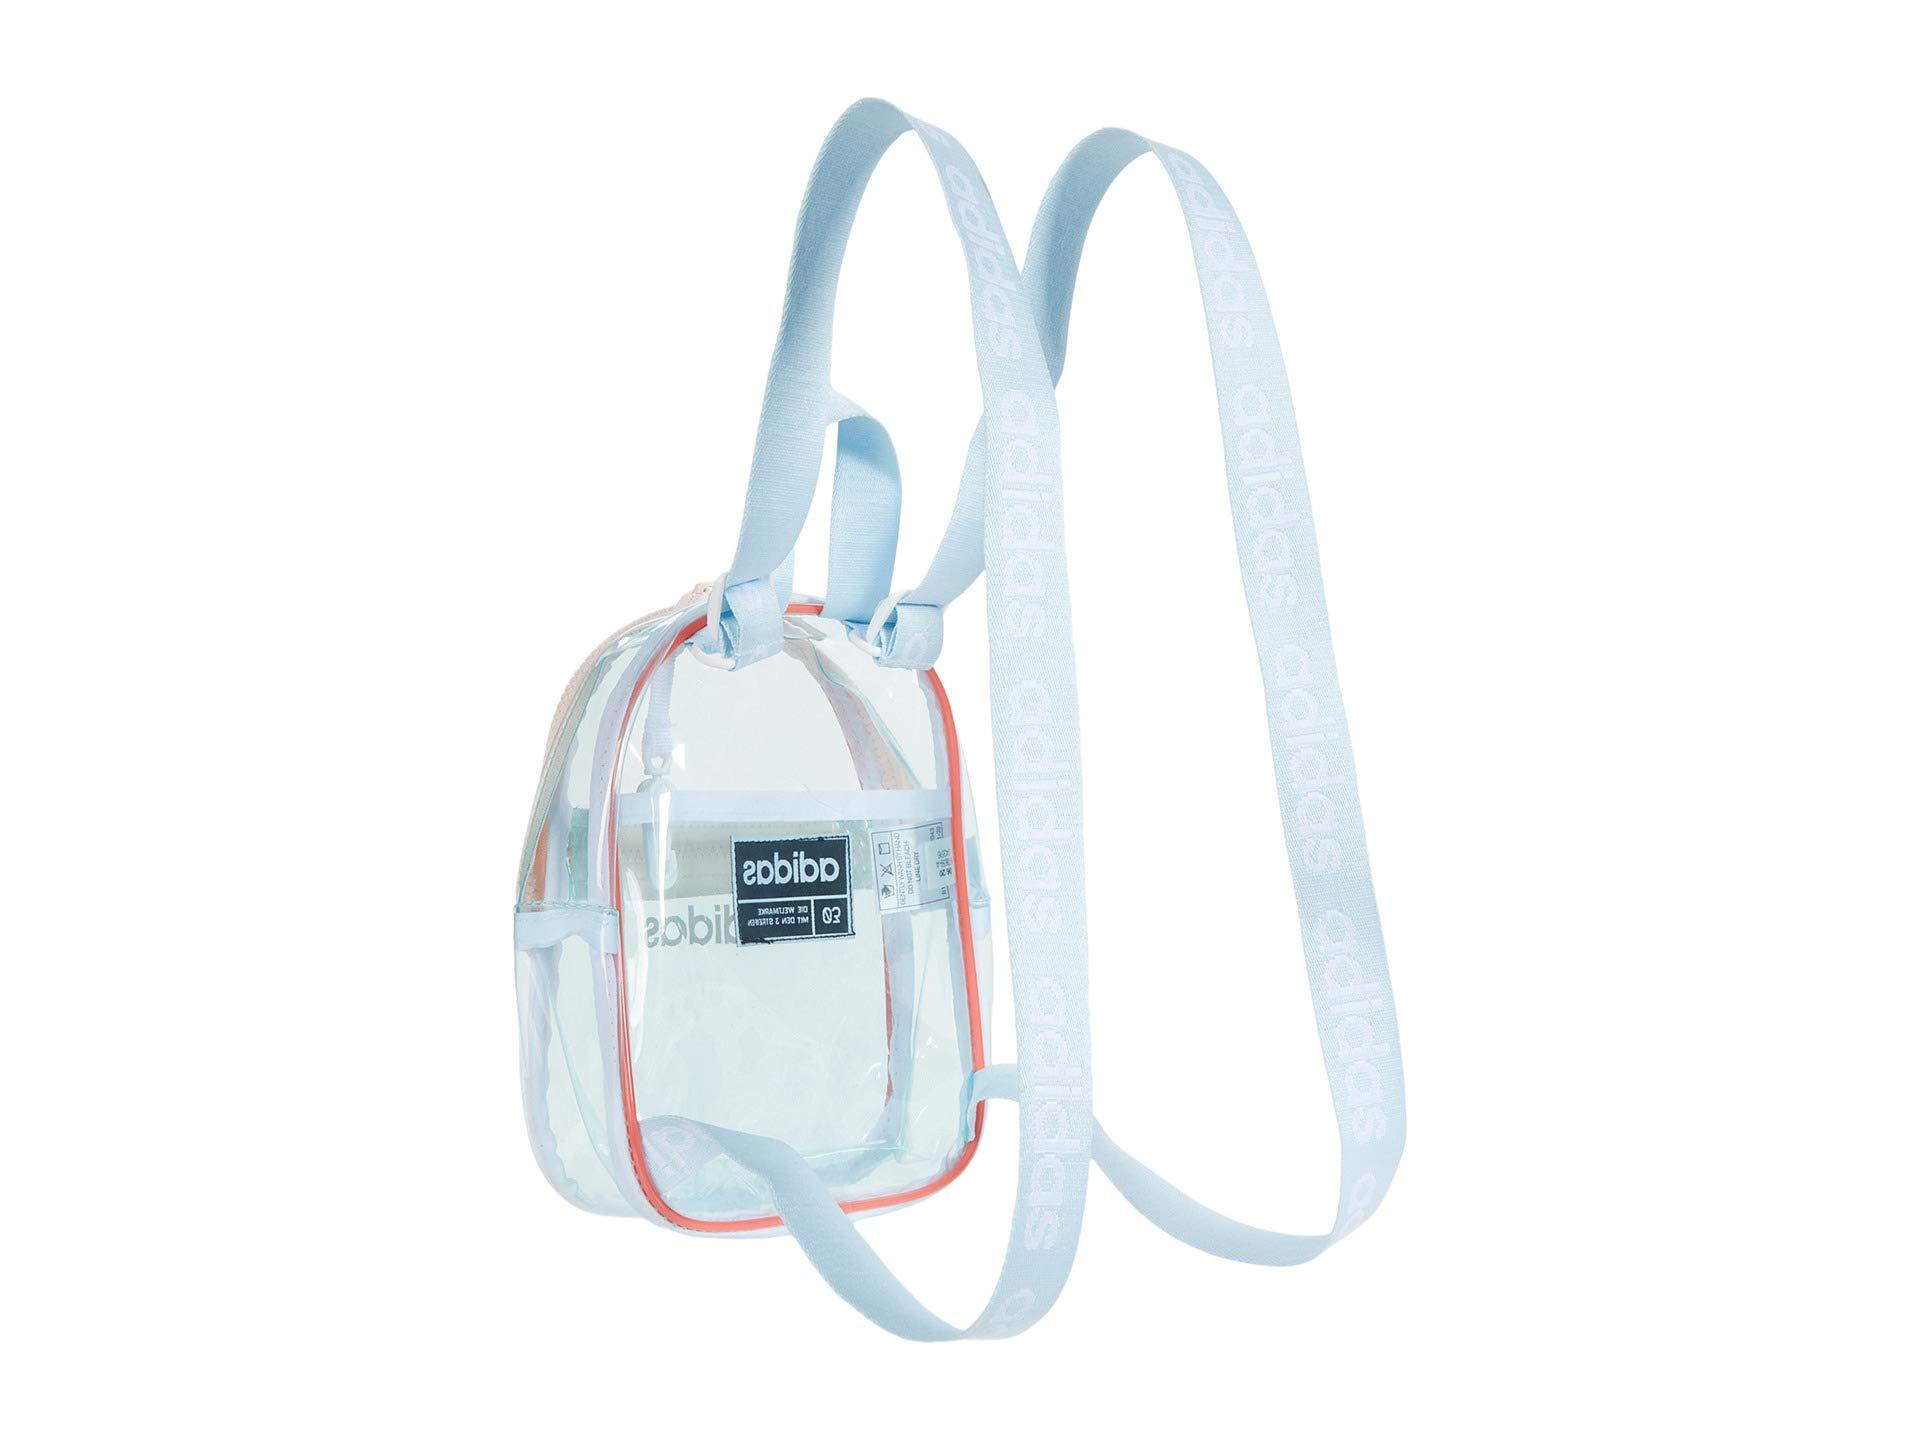 adidas Clear Mini Backpack in Blue | Lyst